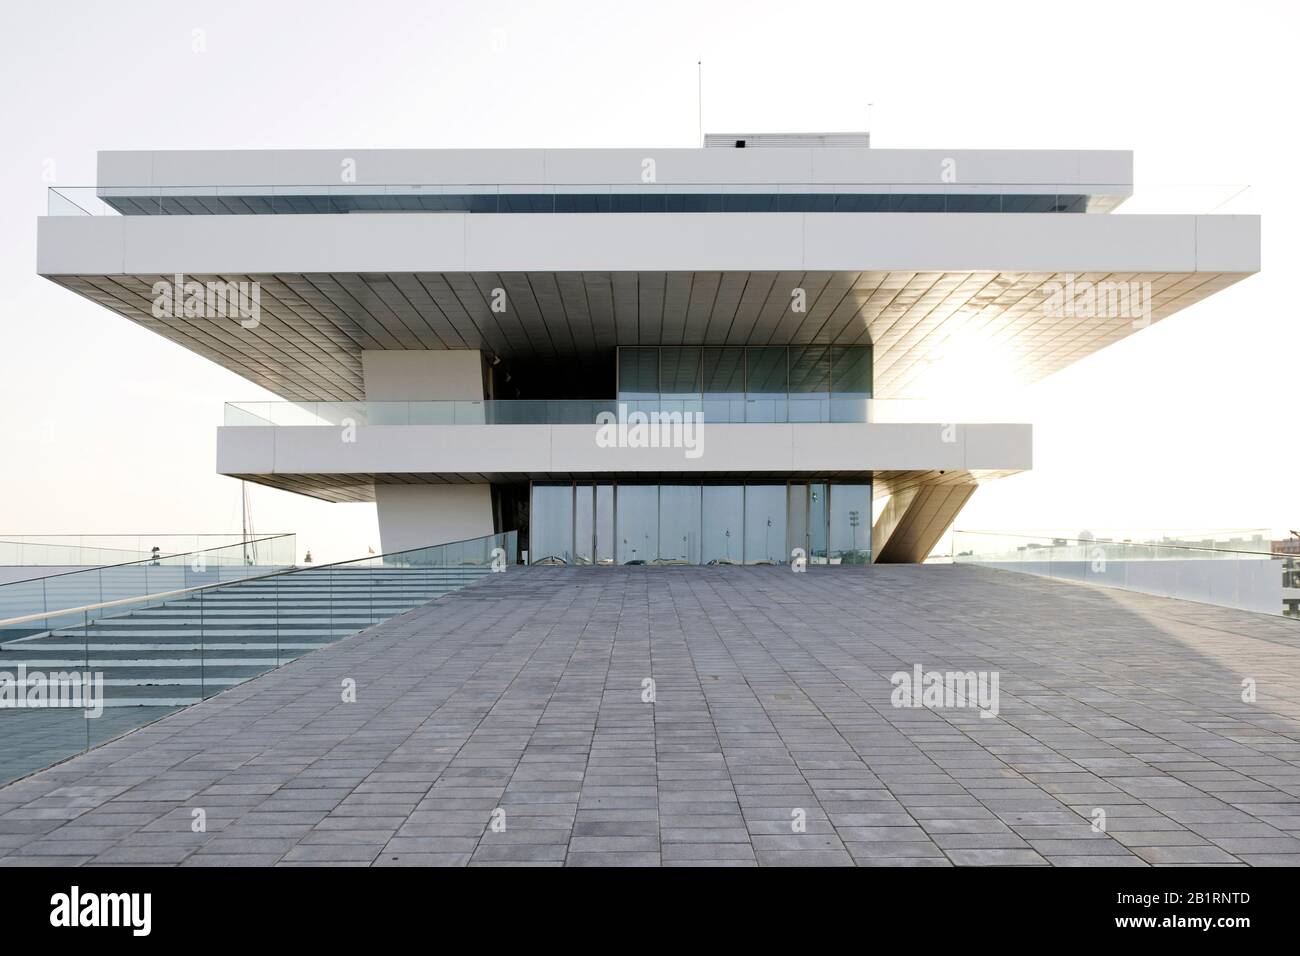 Veles e Vents, architecture by David Chipperfield, Port Americas Cup, port, Valencia, Spain, Stock Photo